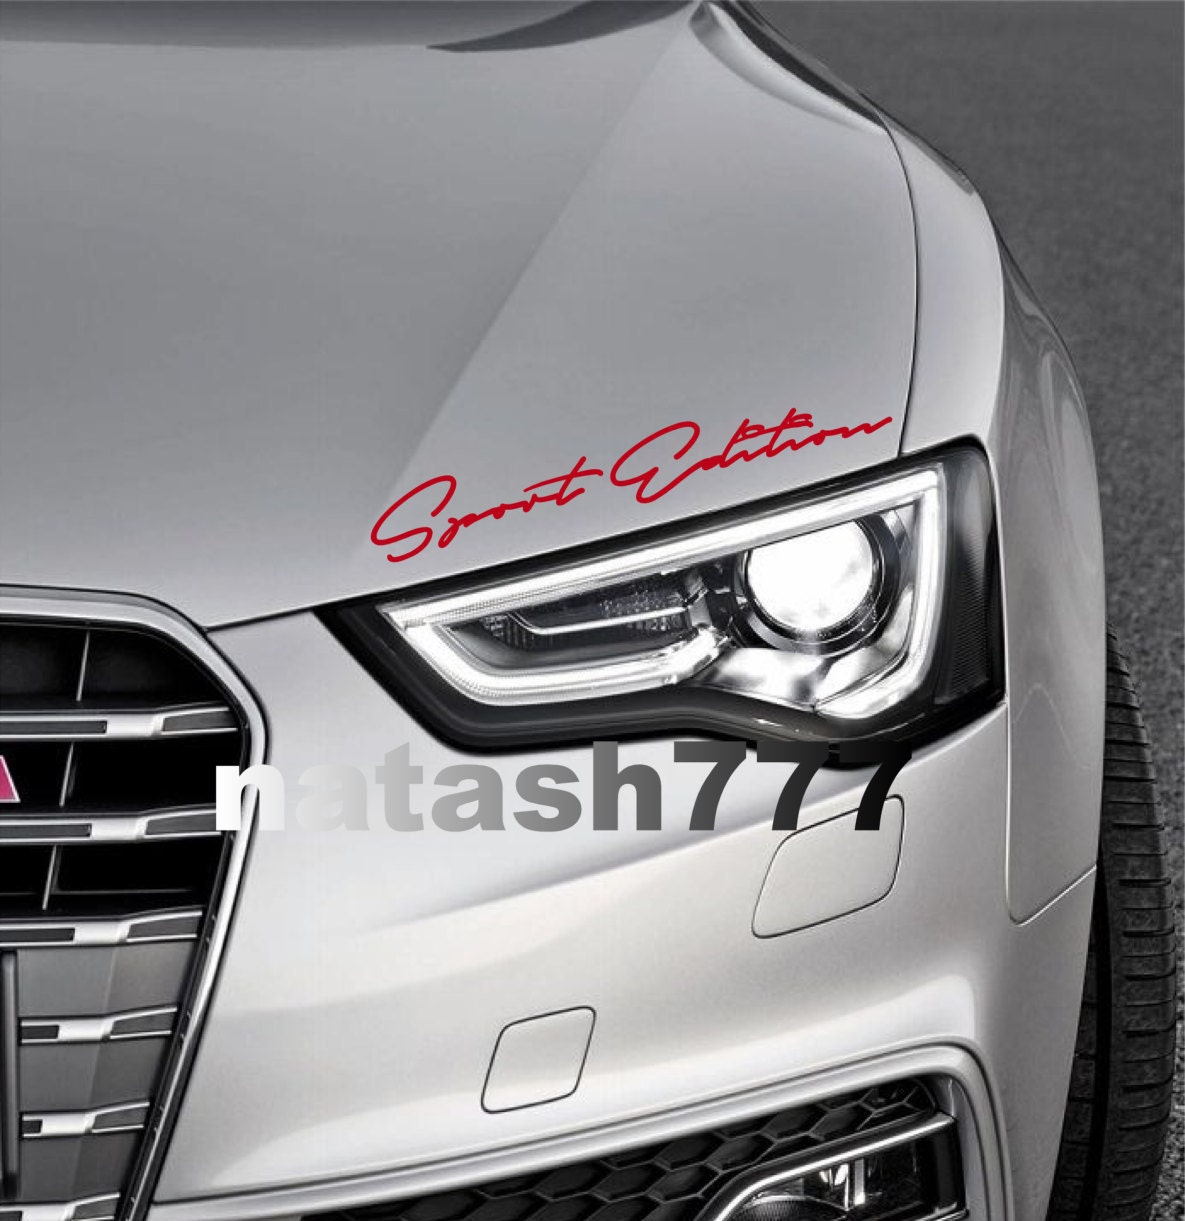  DuoMai 3D Car Sticker Emblem Sport Auto Badge Decal for  Supercharged Audi A3 A4 A5 A6 Q3 Q5 Q7 RS S3 S4 S5 S6 S8 (Silver and  red,Supercharged) : Automotive